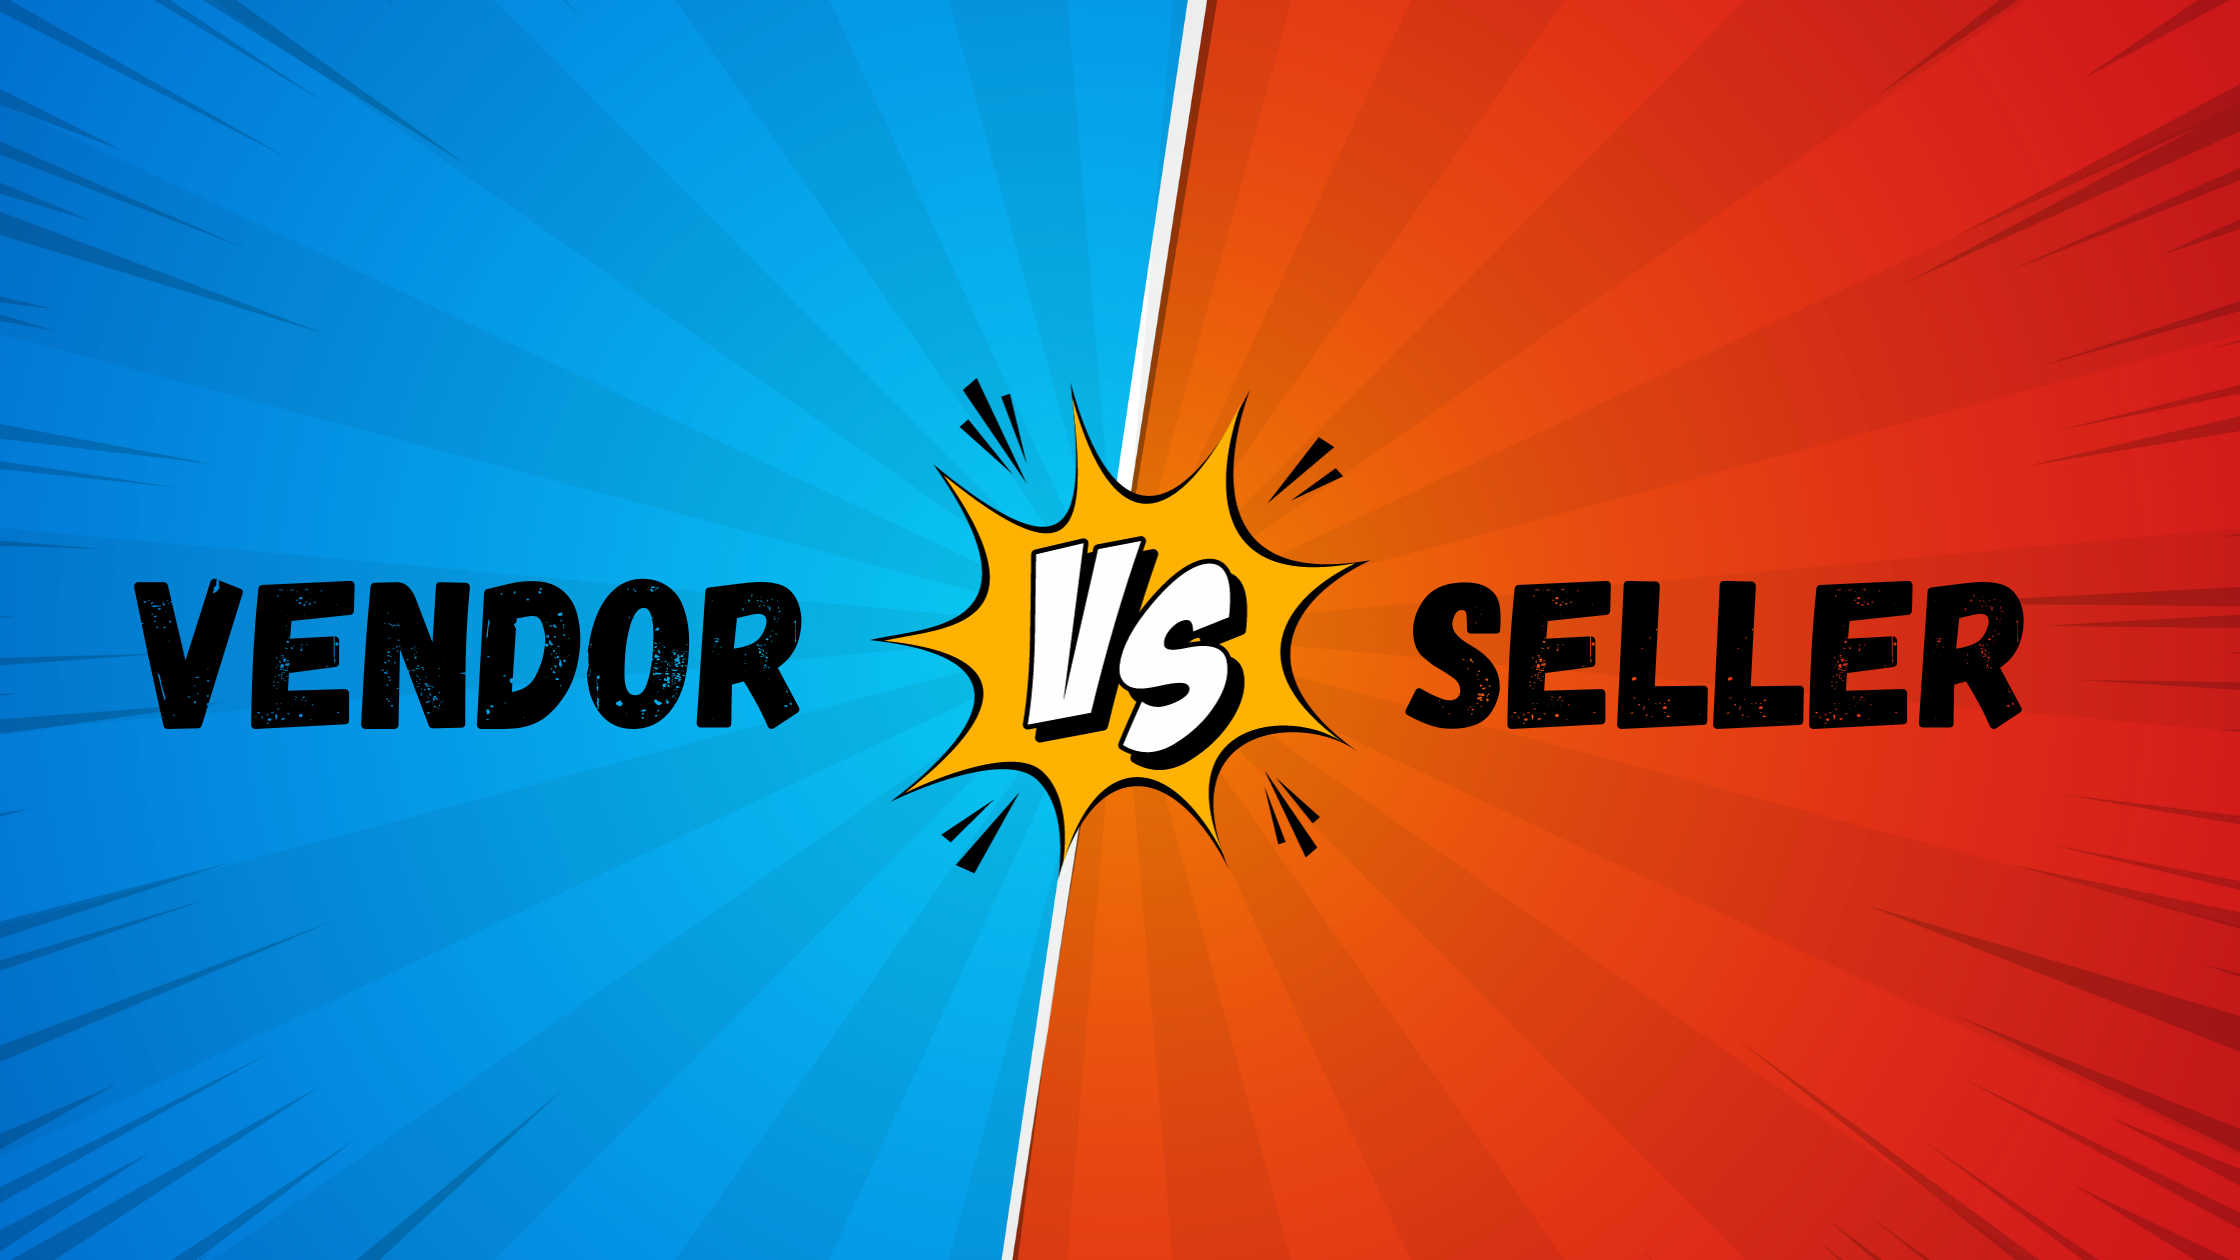 What`s the difference between vendor and seller?